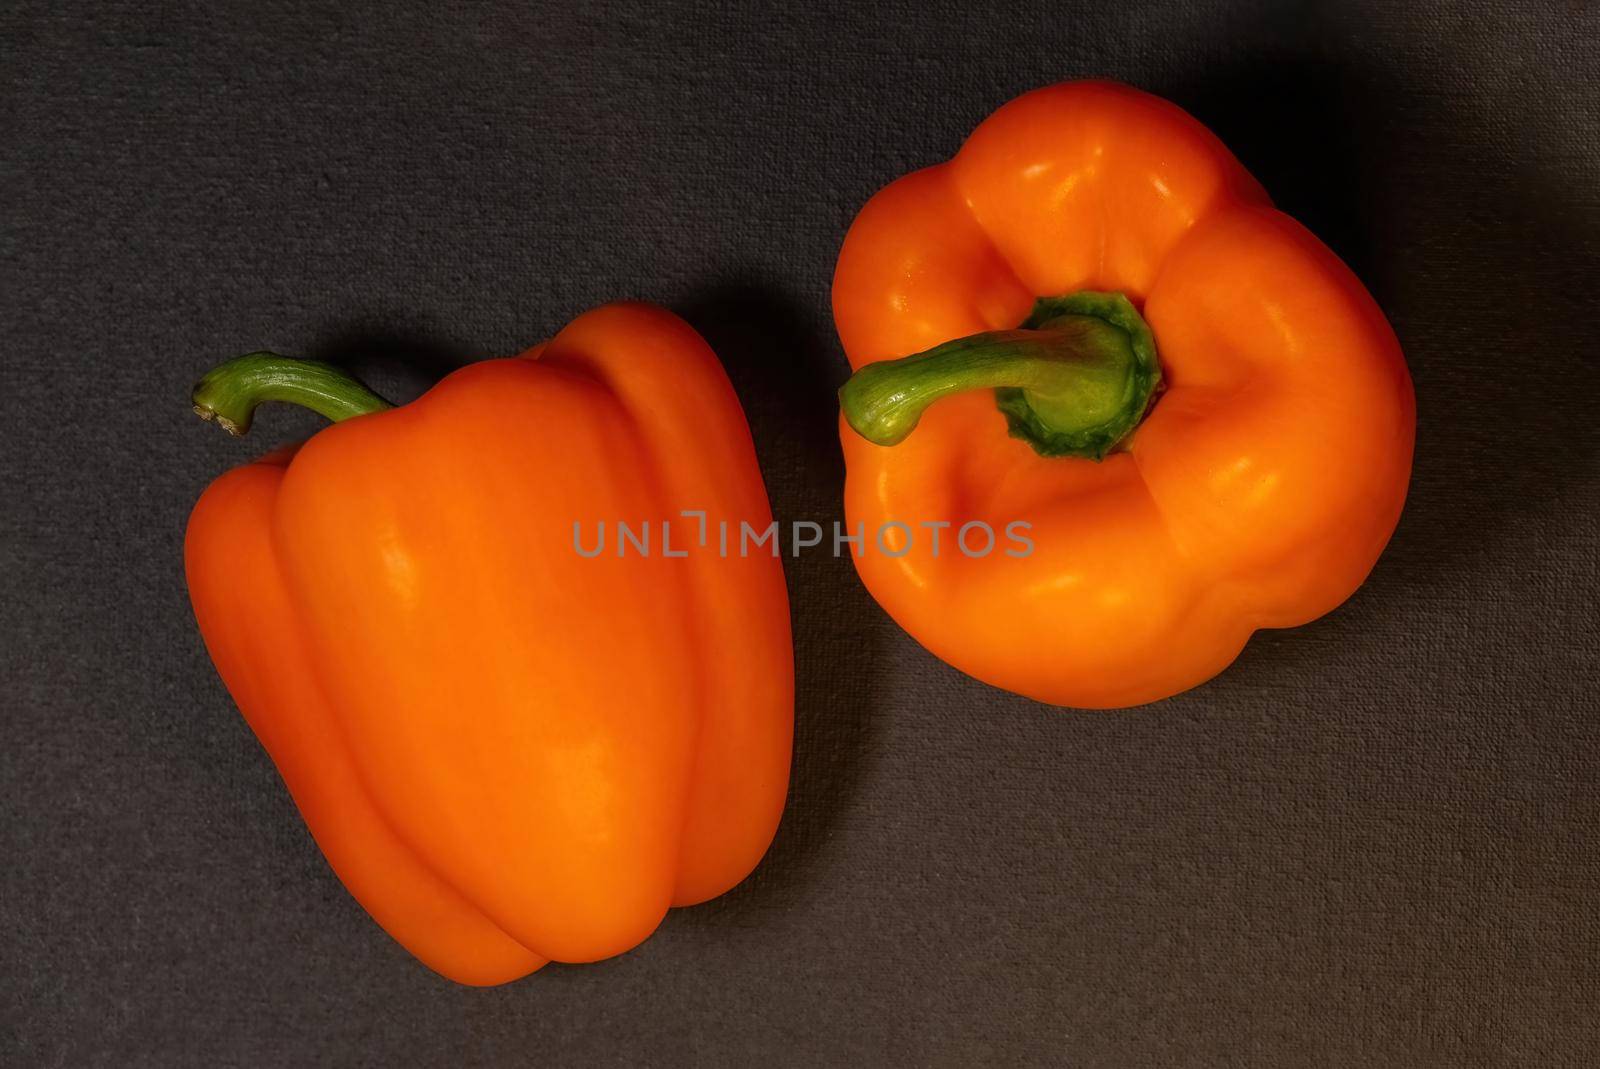 Ripe orange bell peppers on a dark background by clusterx